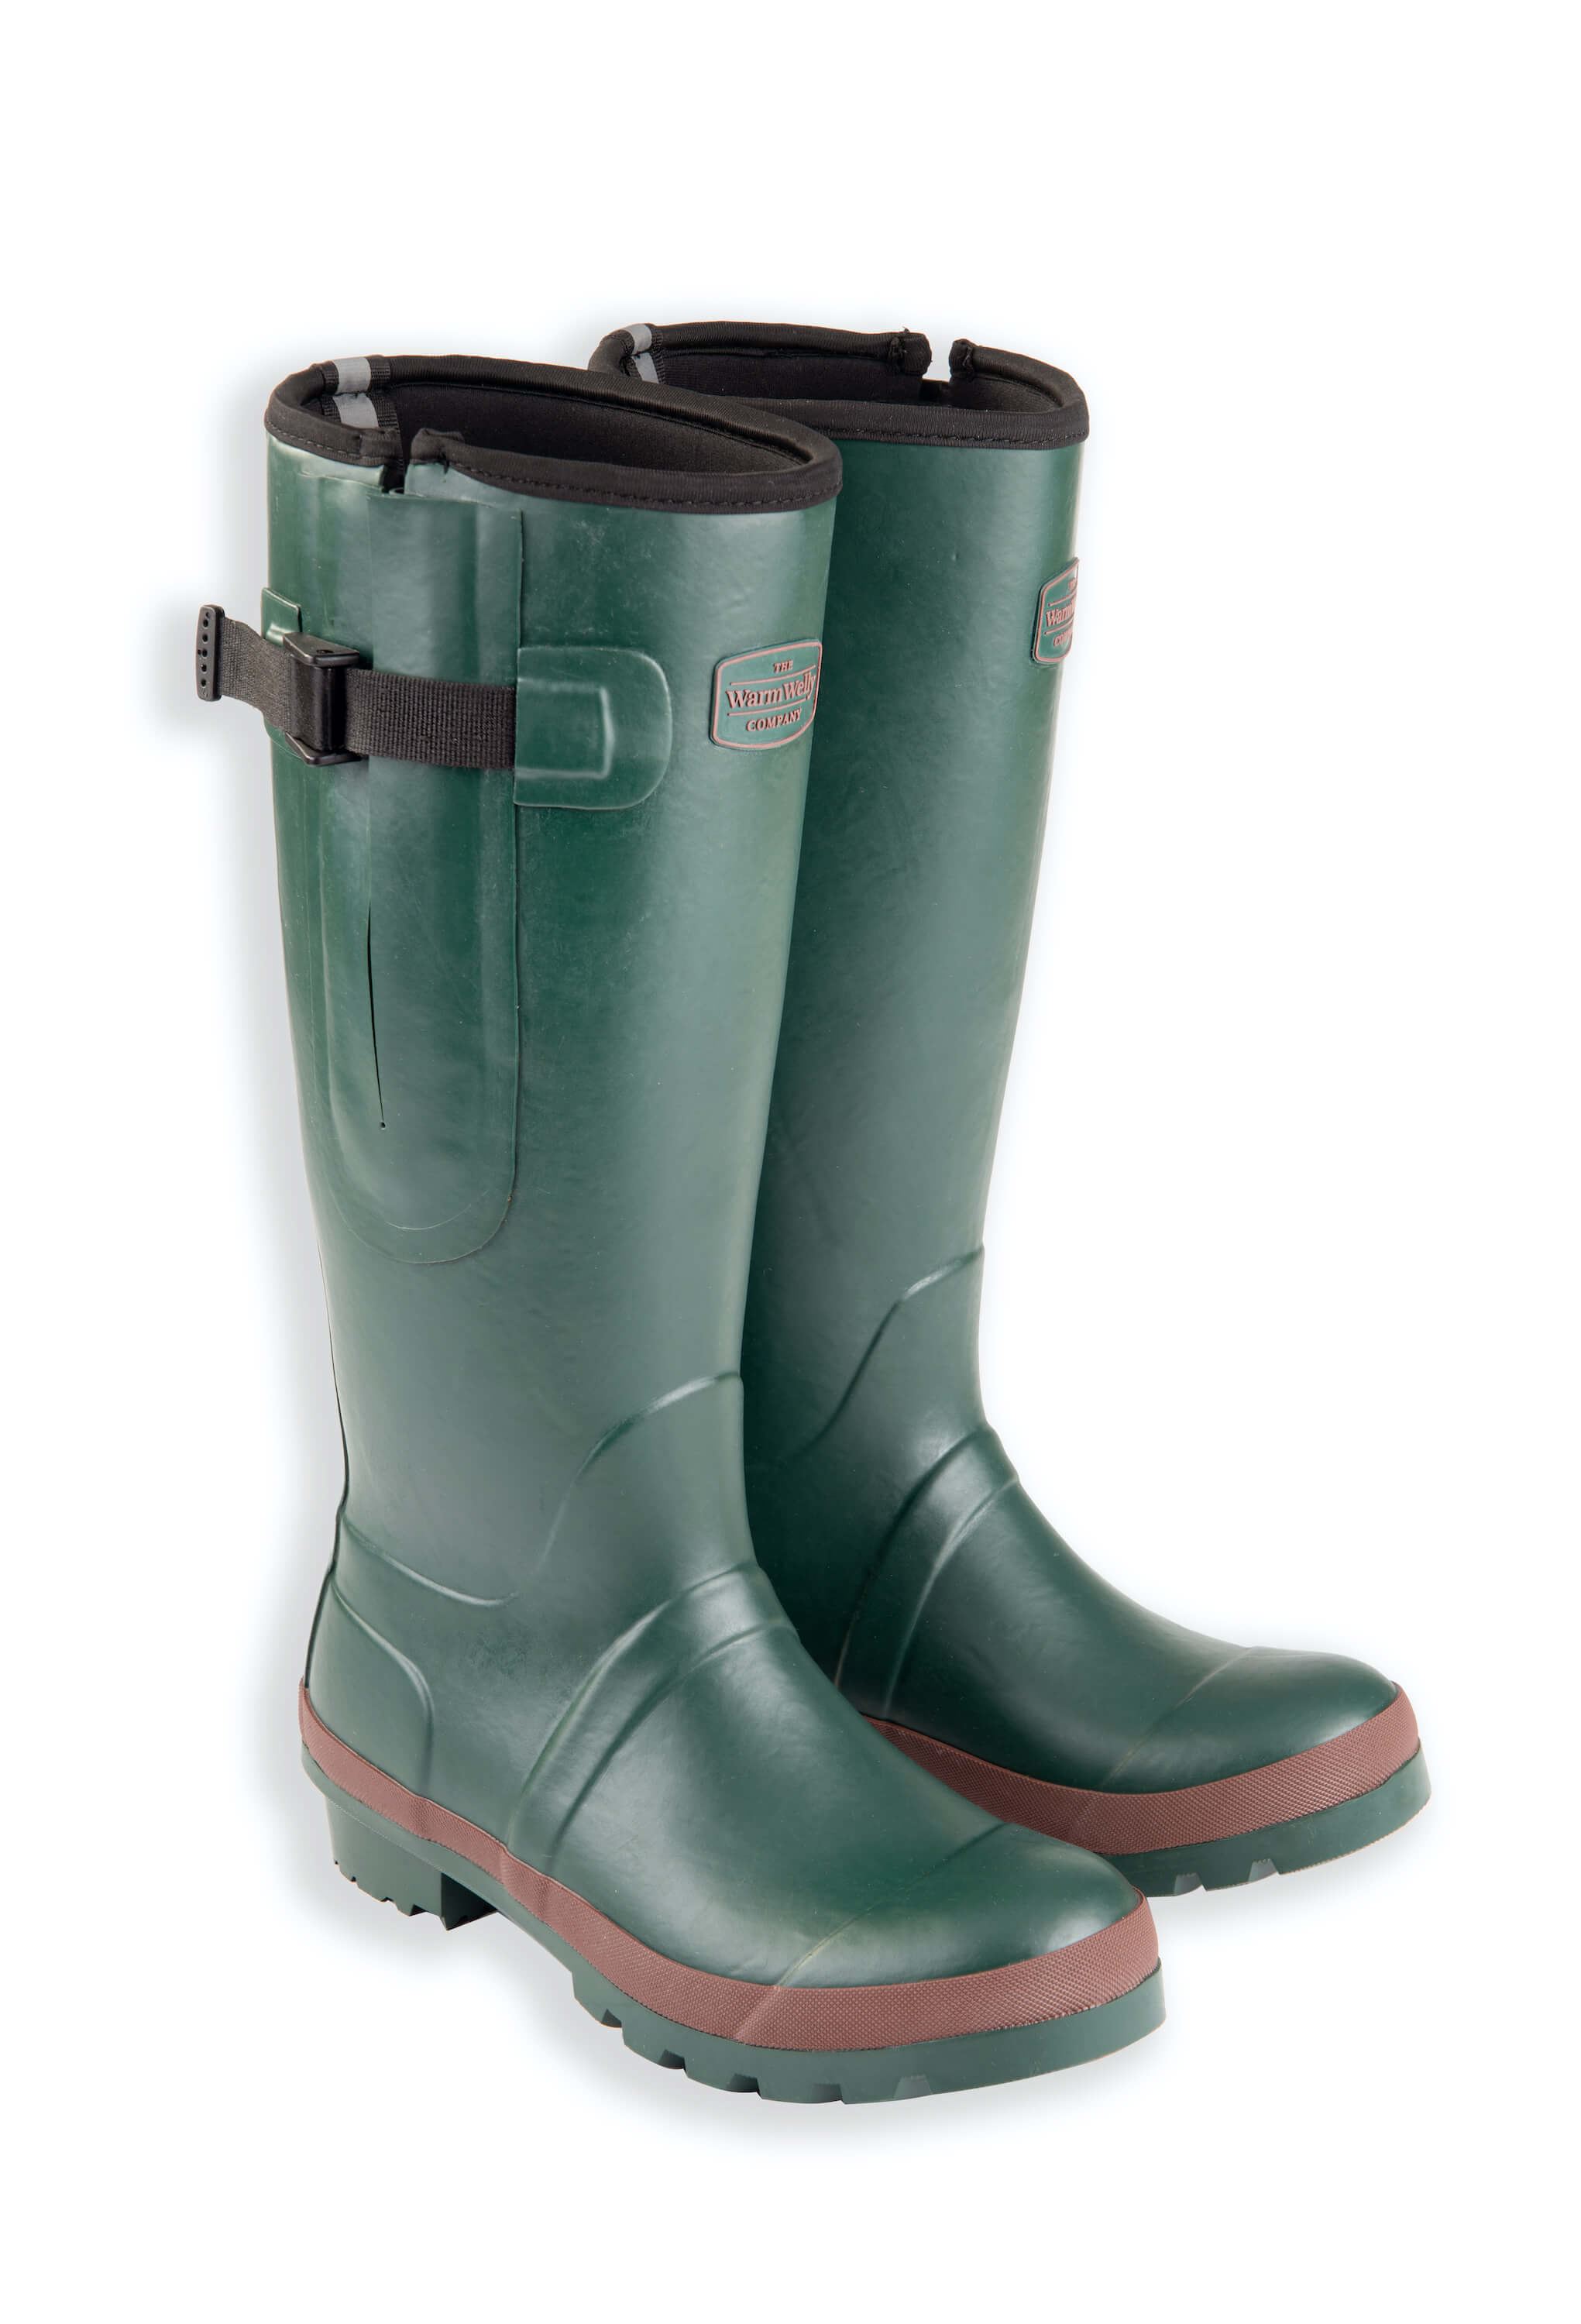 Seconds Green Ladies Wide Warm Wellies | The Warm Welly Company